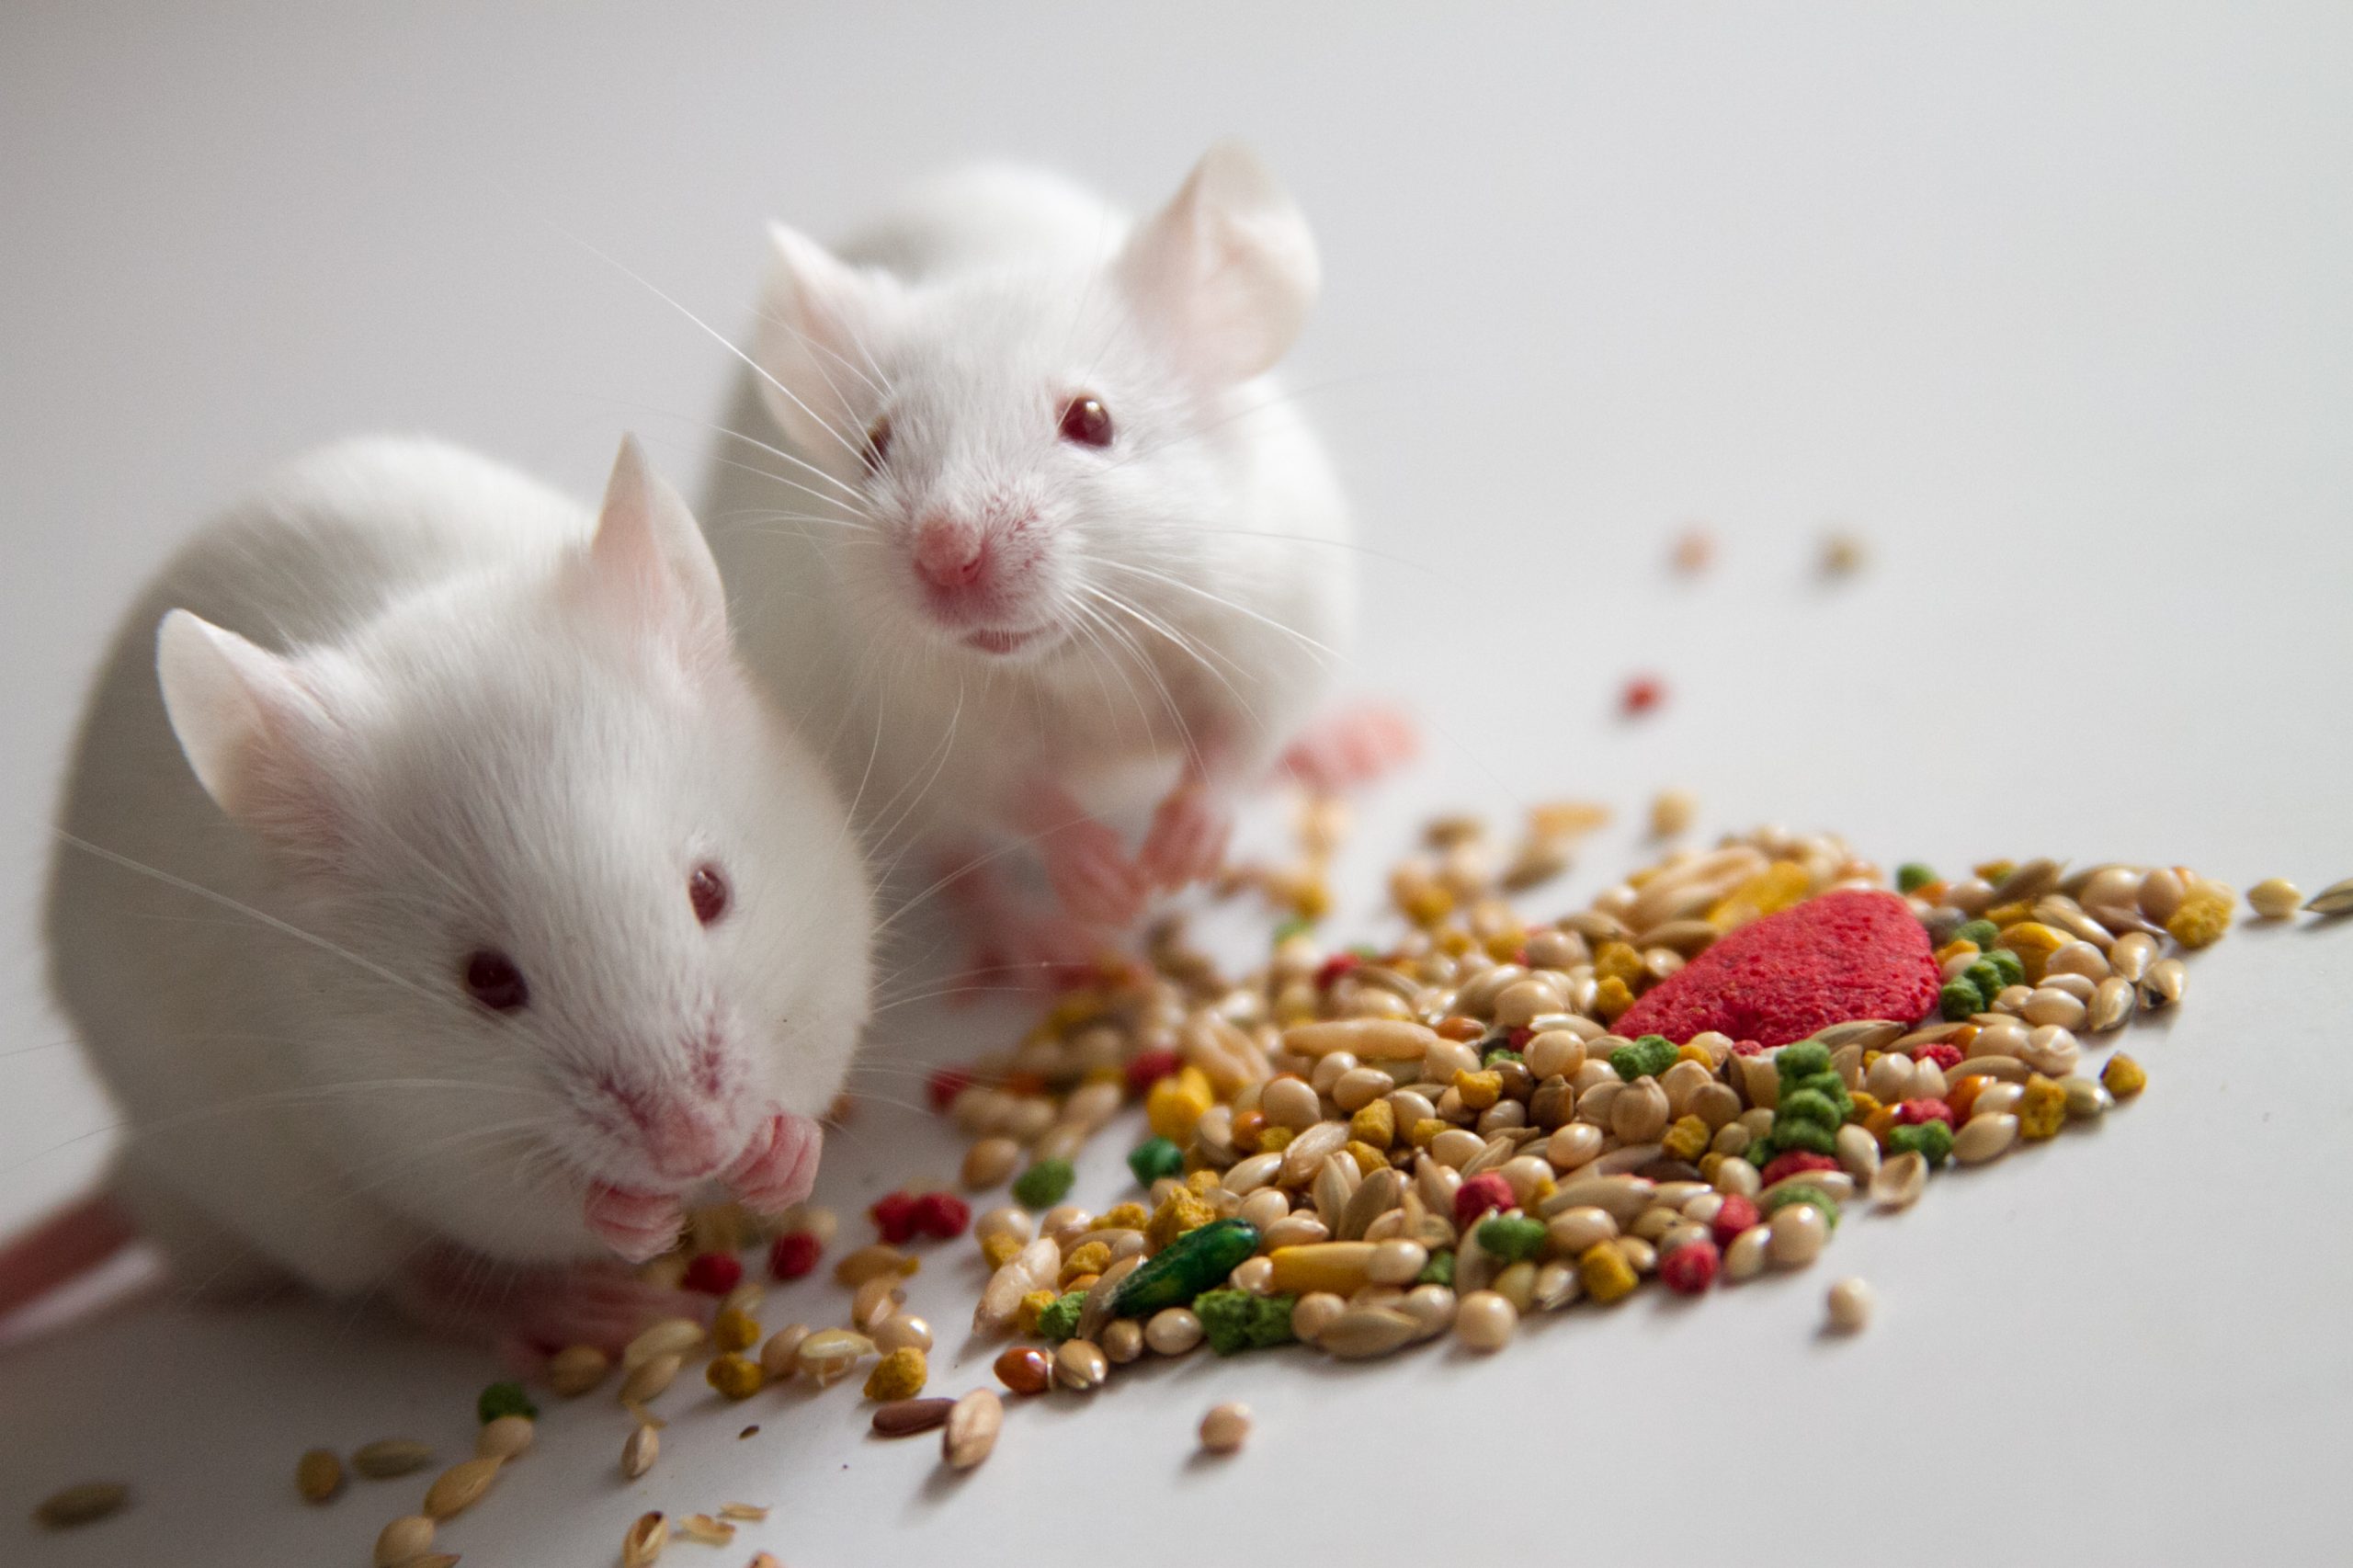 Researchers study food insecurity using mice